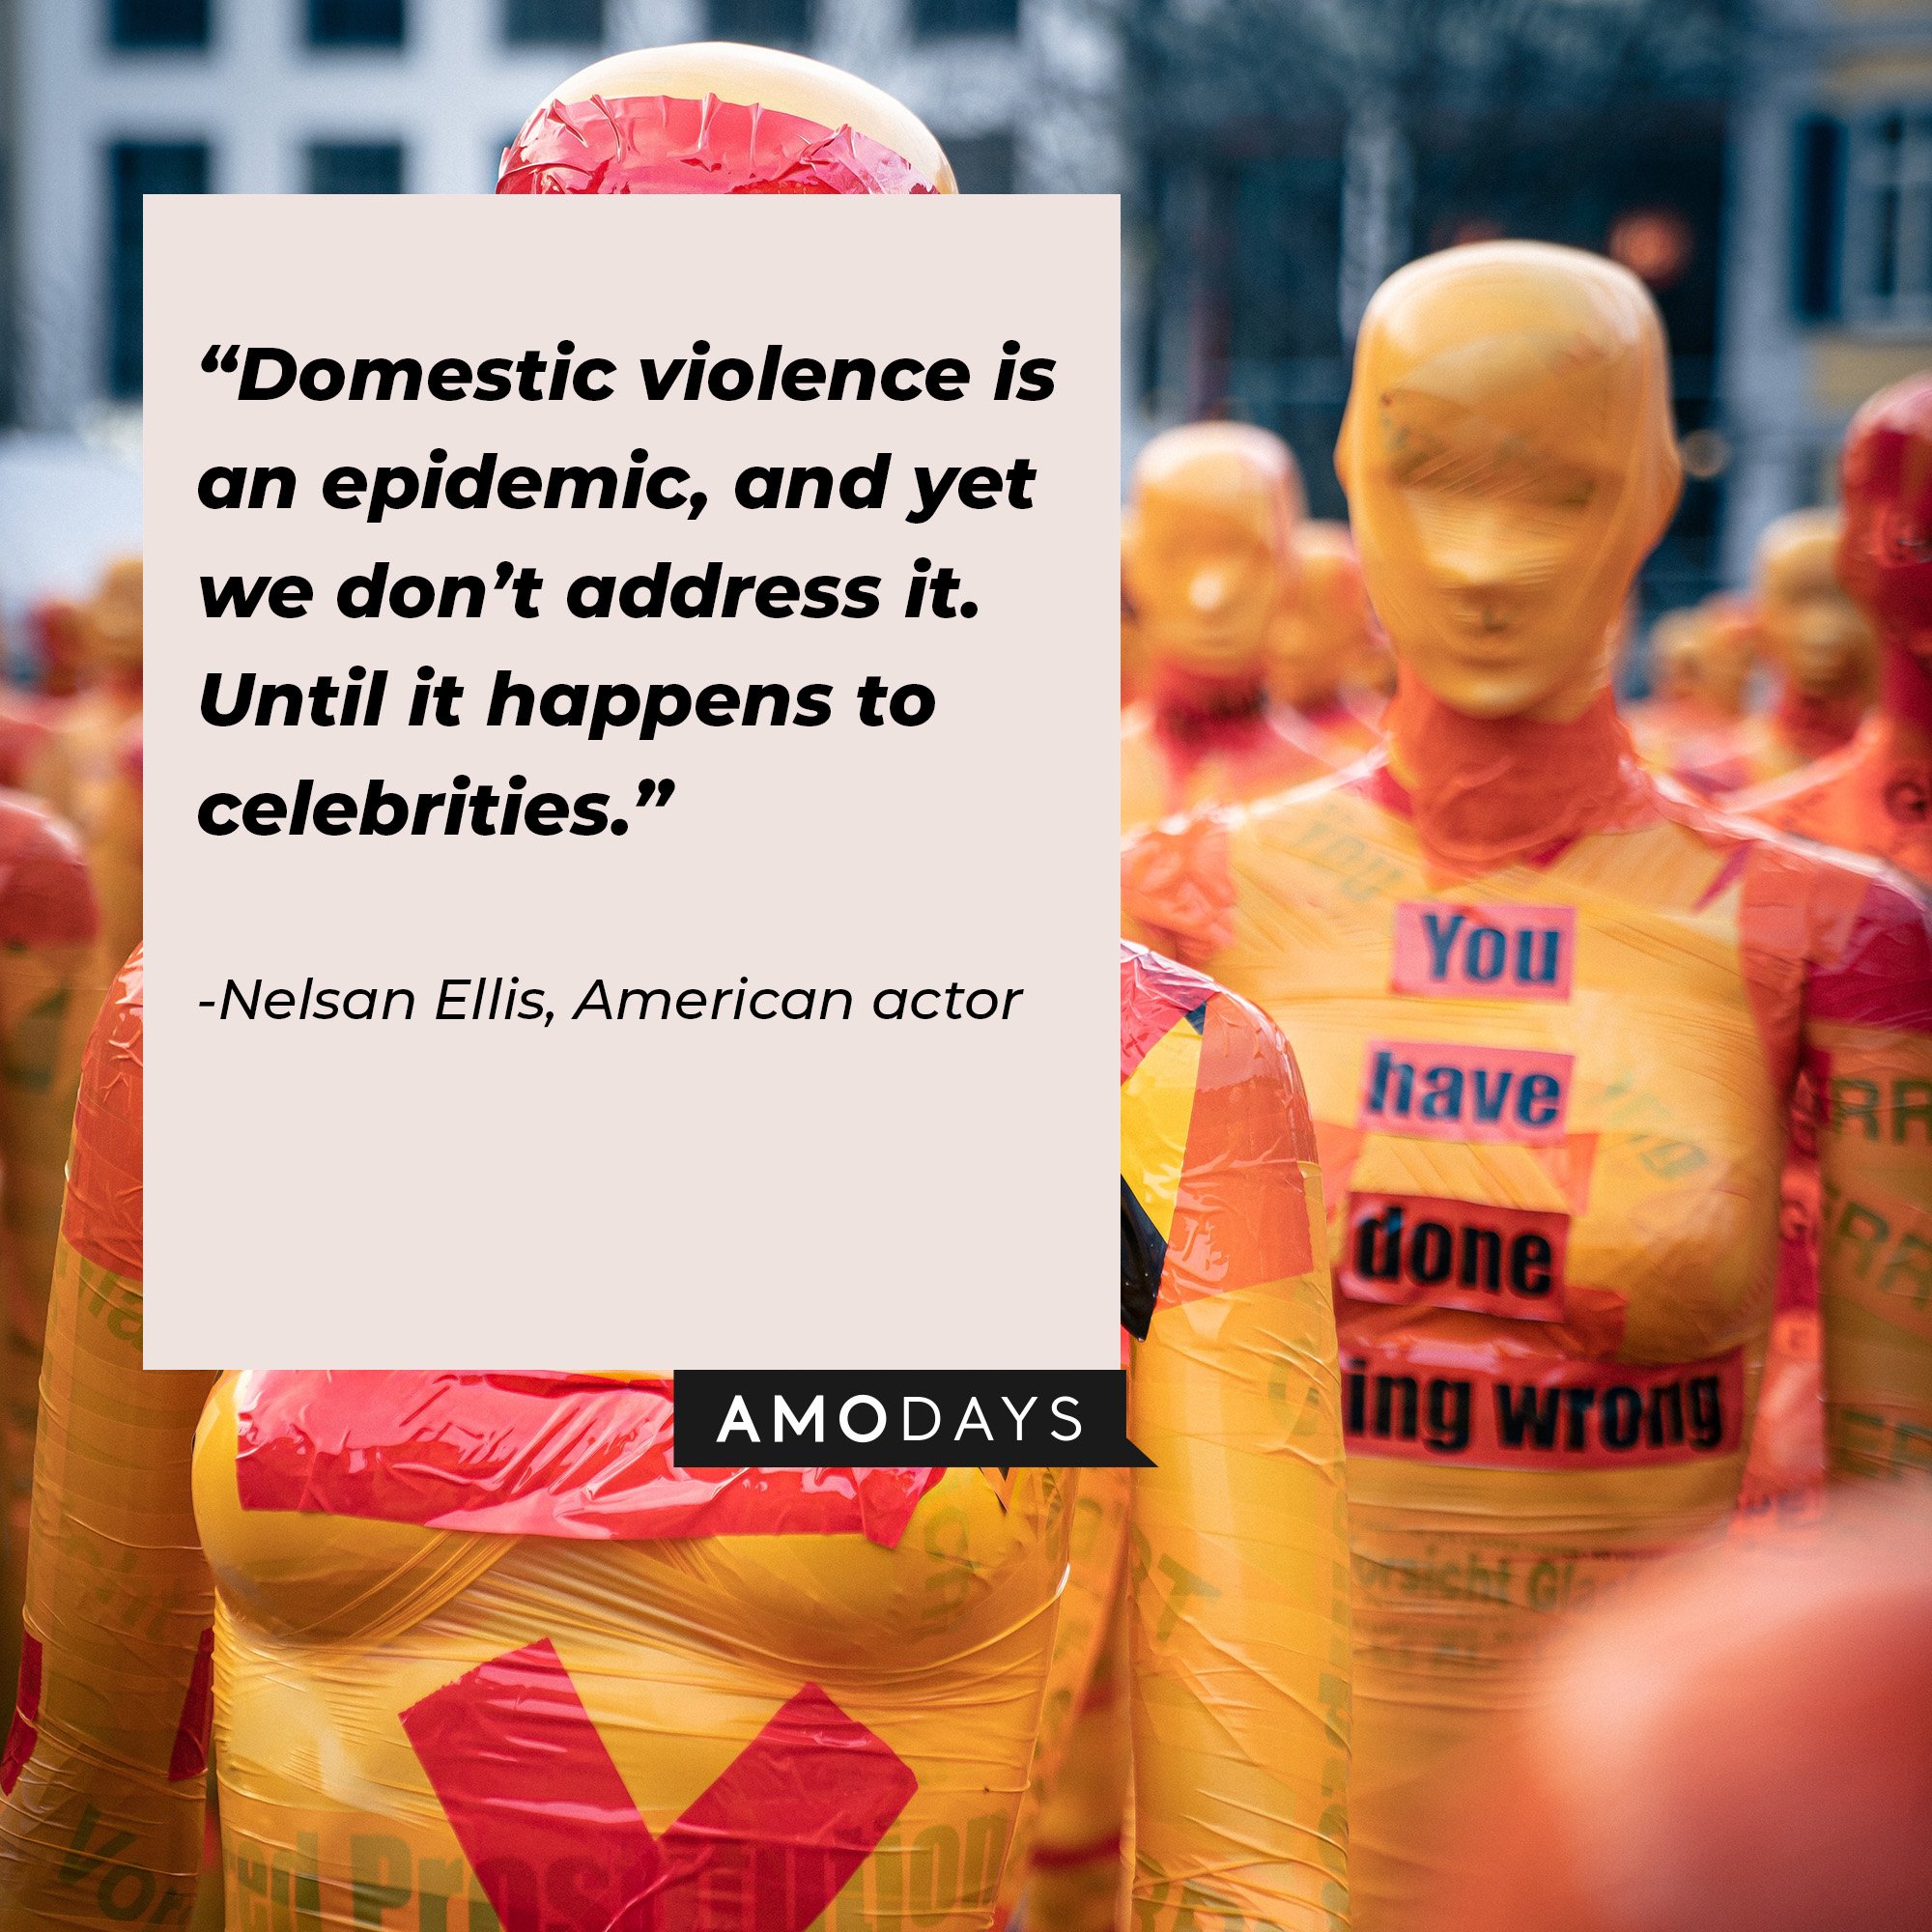 Nelsan Ellis’ quote “Domestic violence is an epidemic, and yet we don’t address it. Until it happens to celebrities.” | Image: AmoDays  